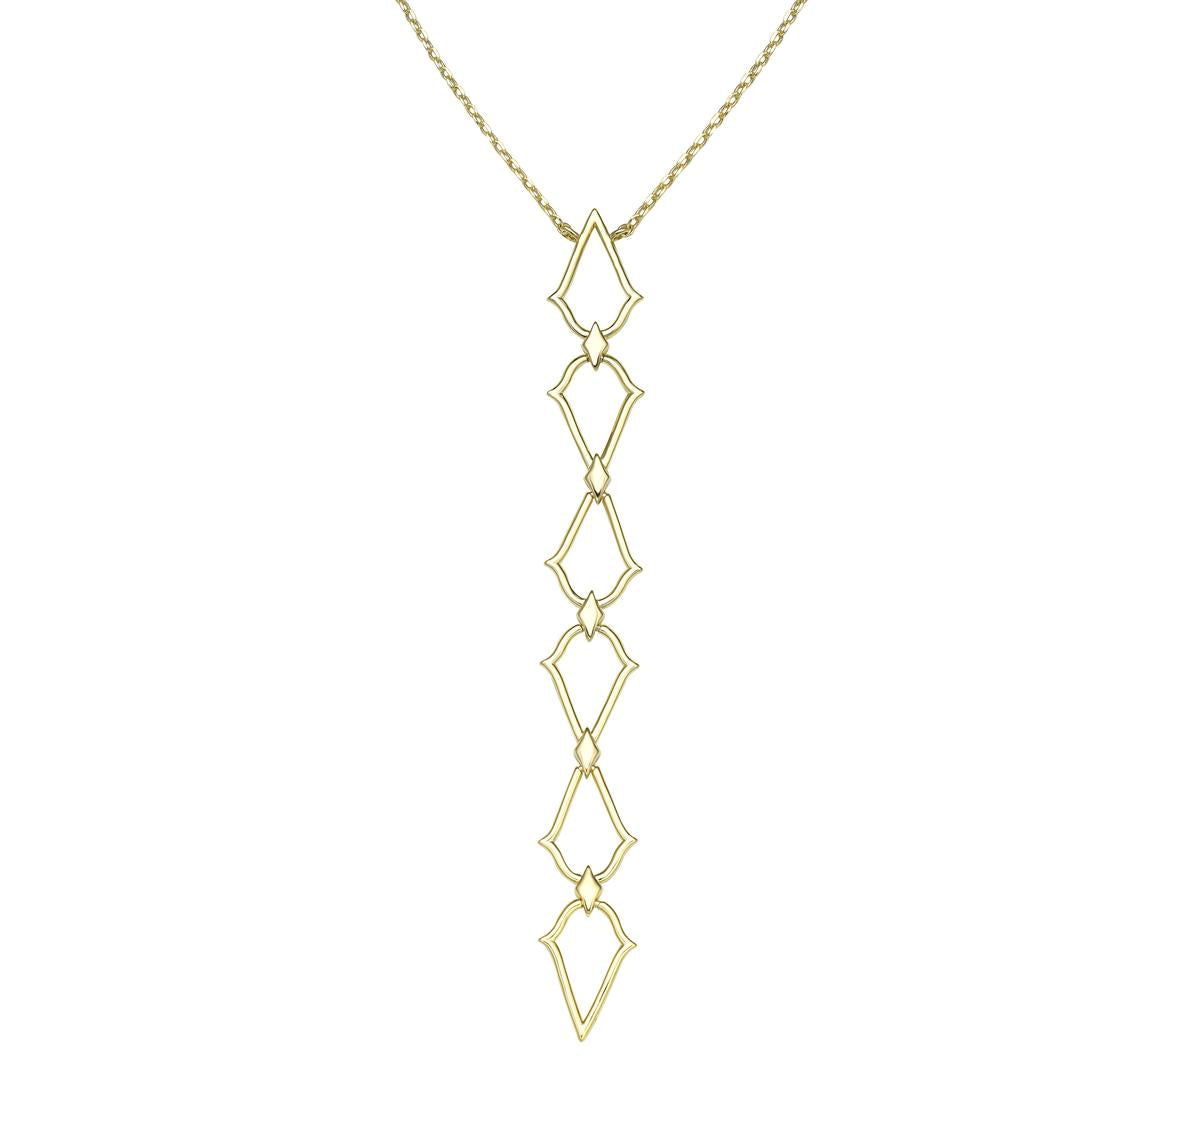 Natalie Wood Designs - Southern Charm Lariat